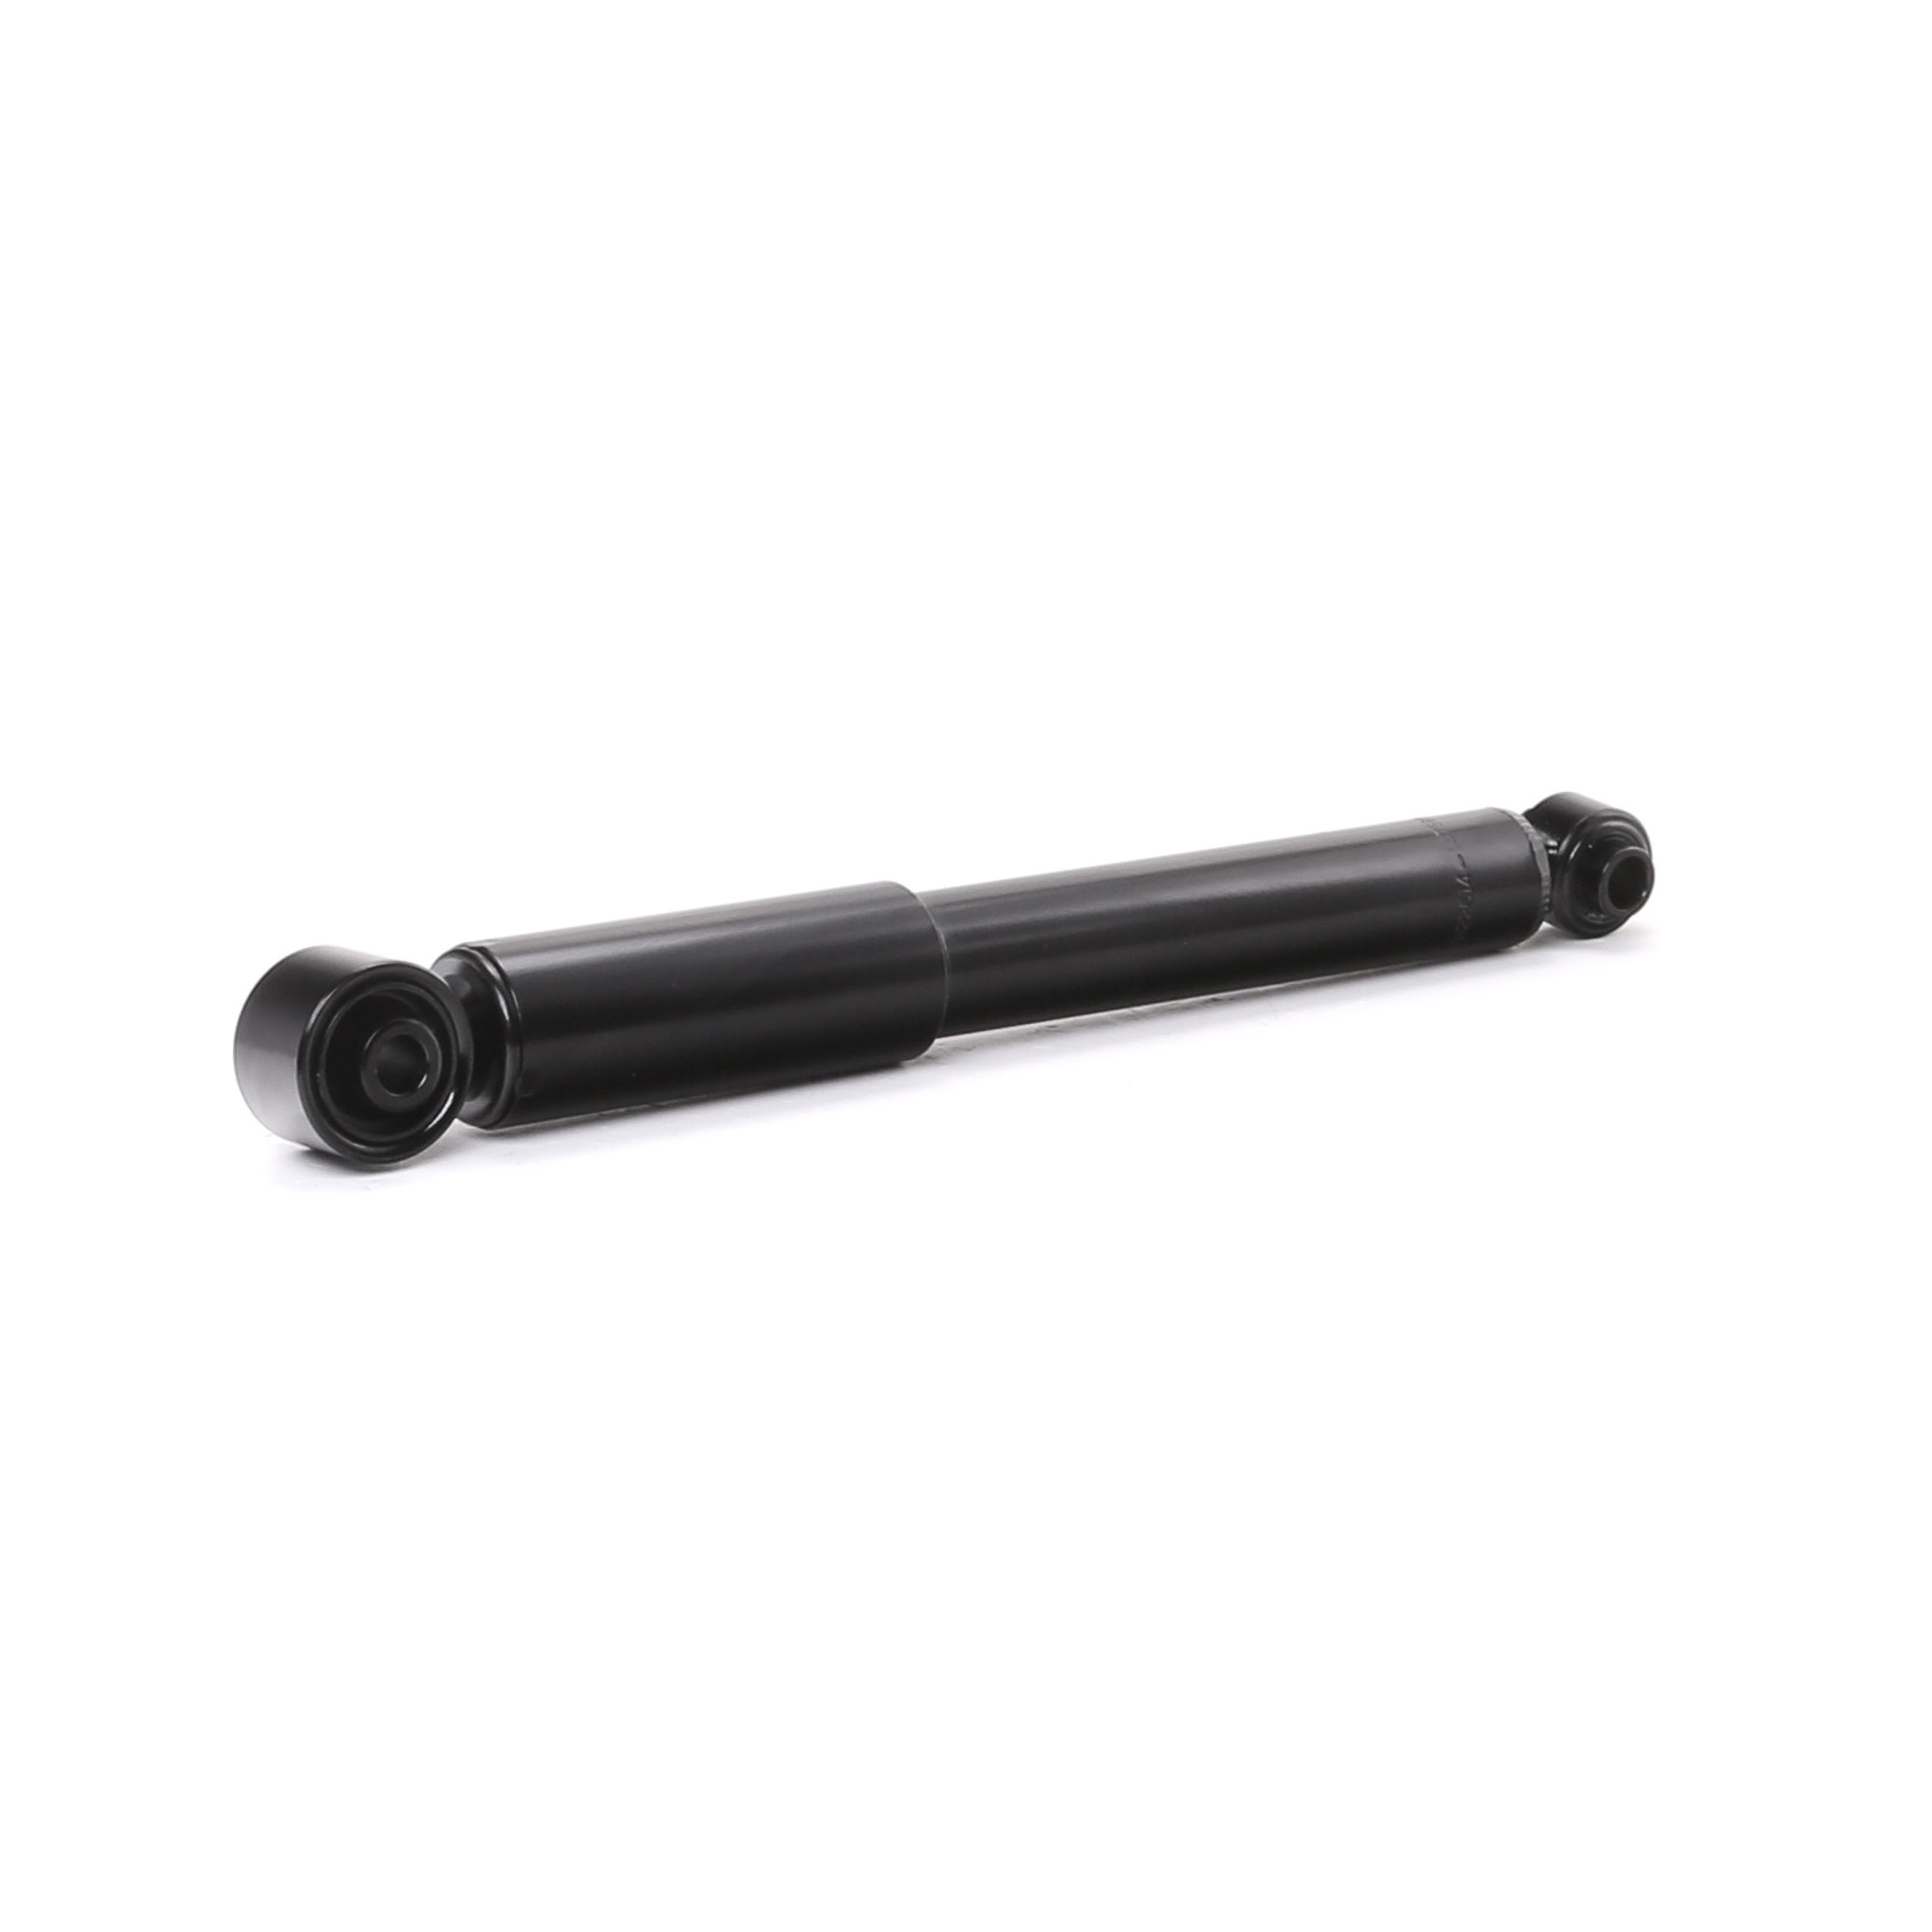 STARK SKSA-0133331 Shock absorber Rear Axle, Gas Pressure, 389x273 mm, Twin-Tube, Absorber does not carry a spring, Top eye, Bottom eye